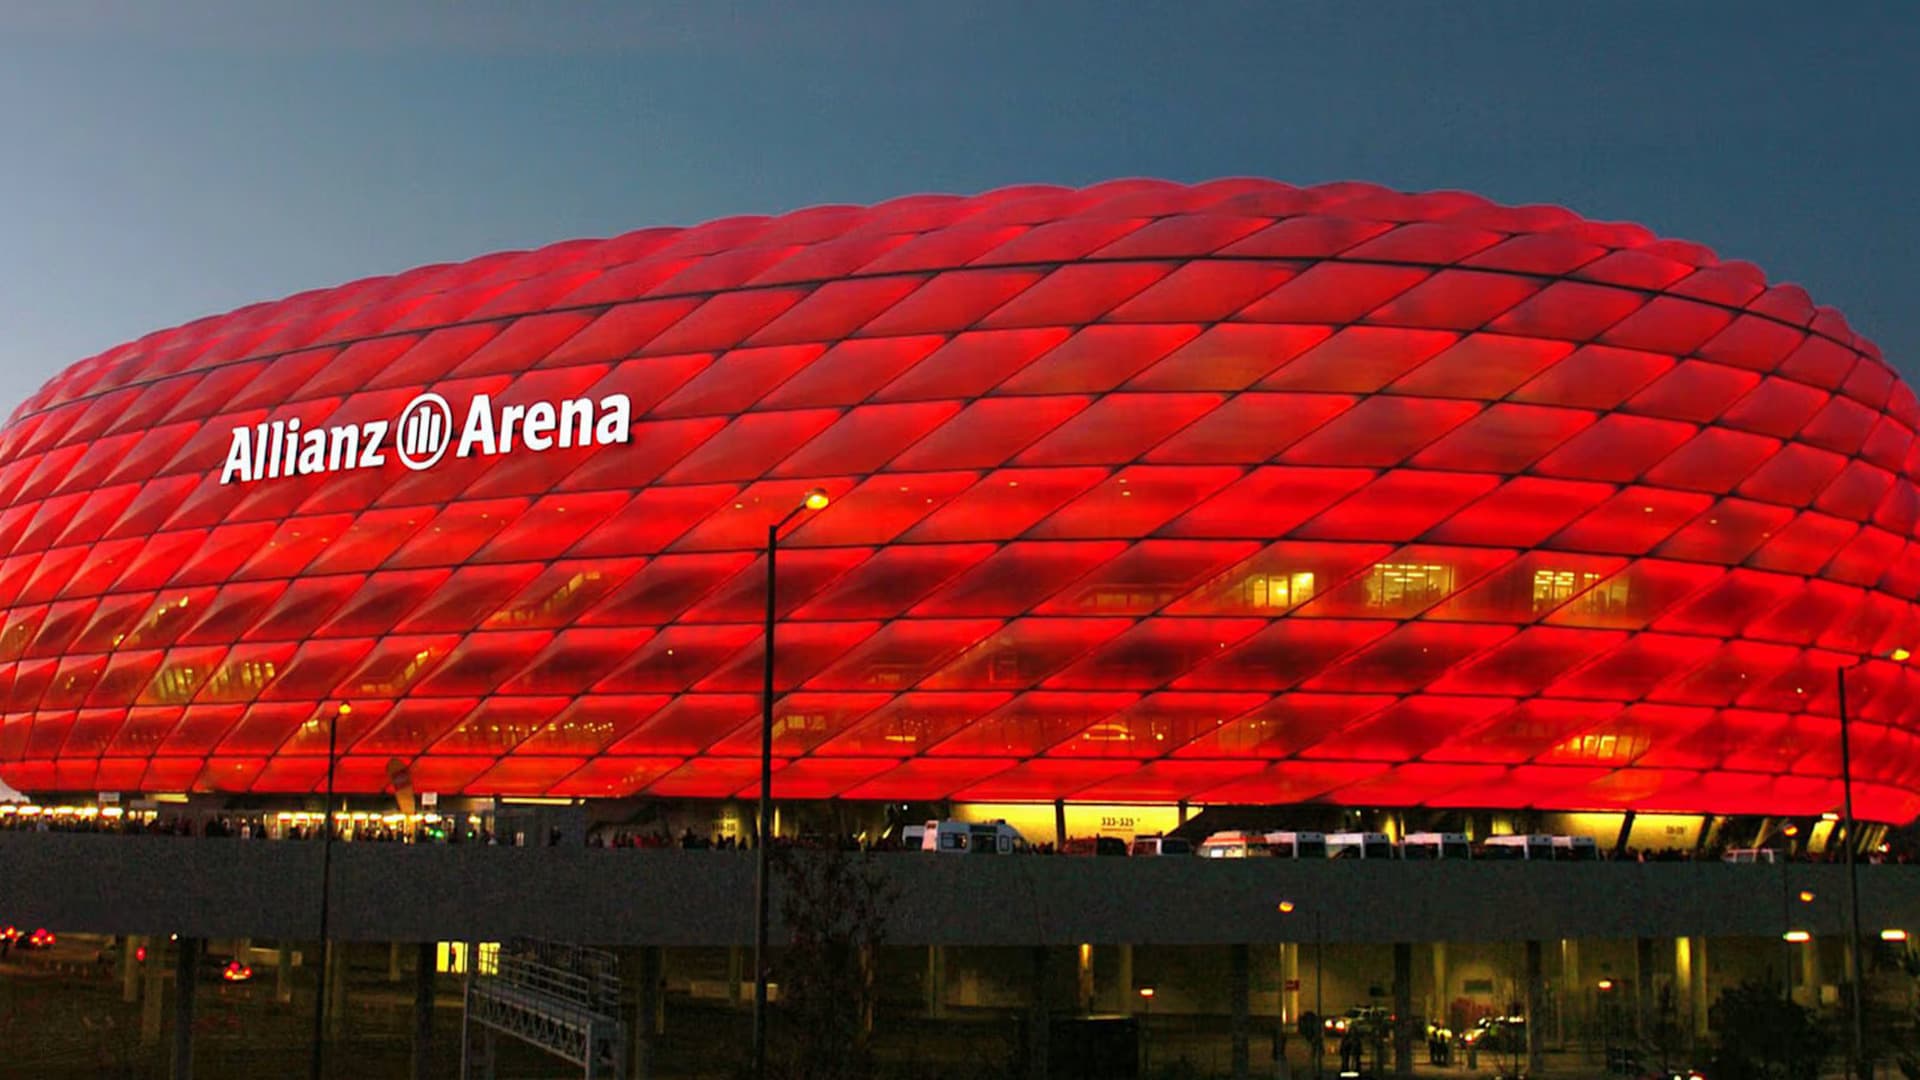 The Allianz Arena, Germany - The most beautiful football stadiums in the world